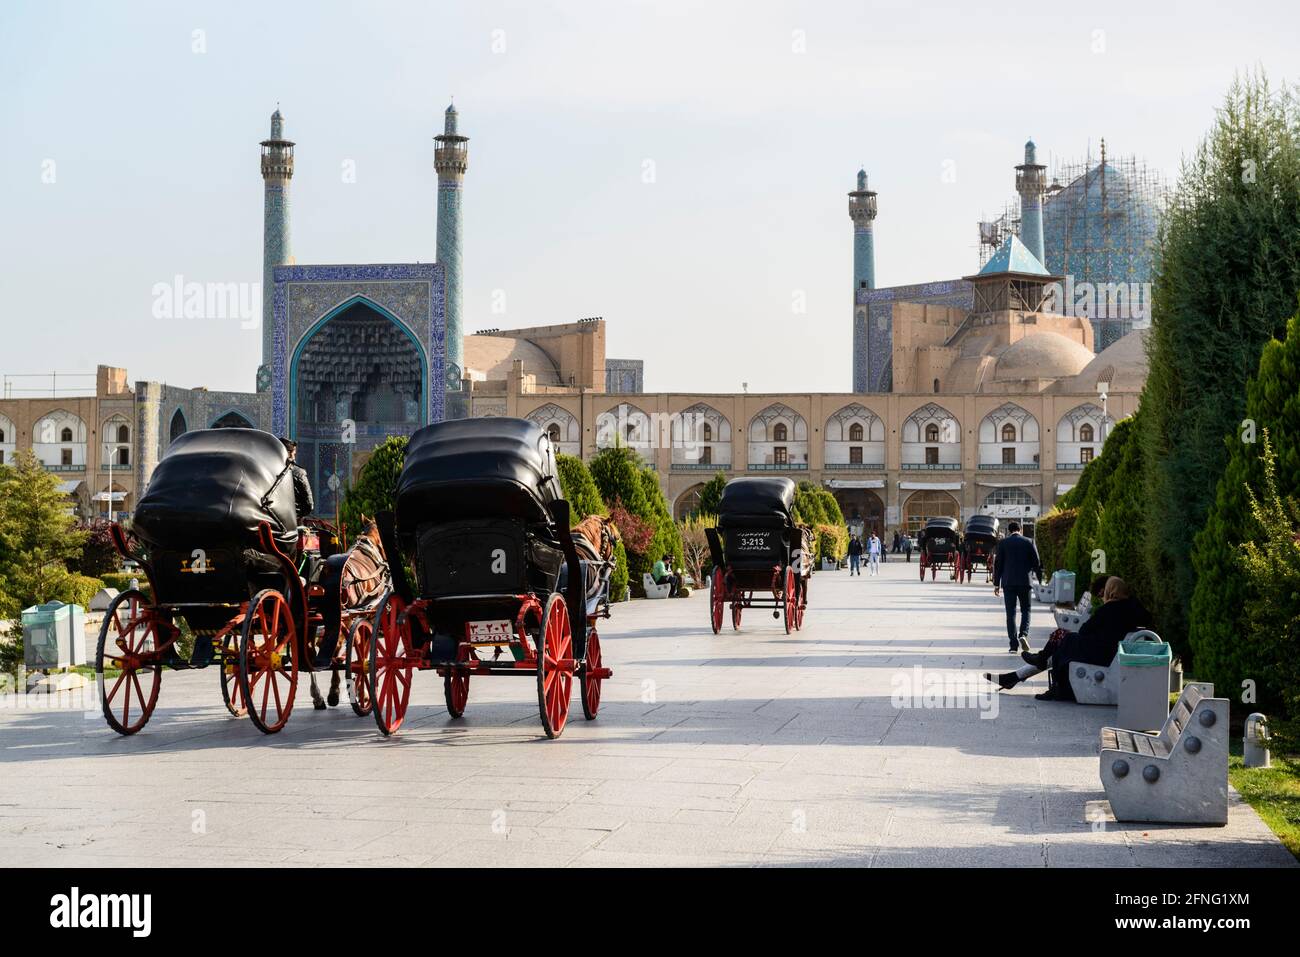 Horse-drawn carriages driving around with tourists on the Naqsh-e Jahan Square. Shah Mosque in the background. Isfahan, Iran. Stock Photo